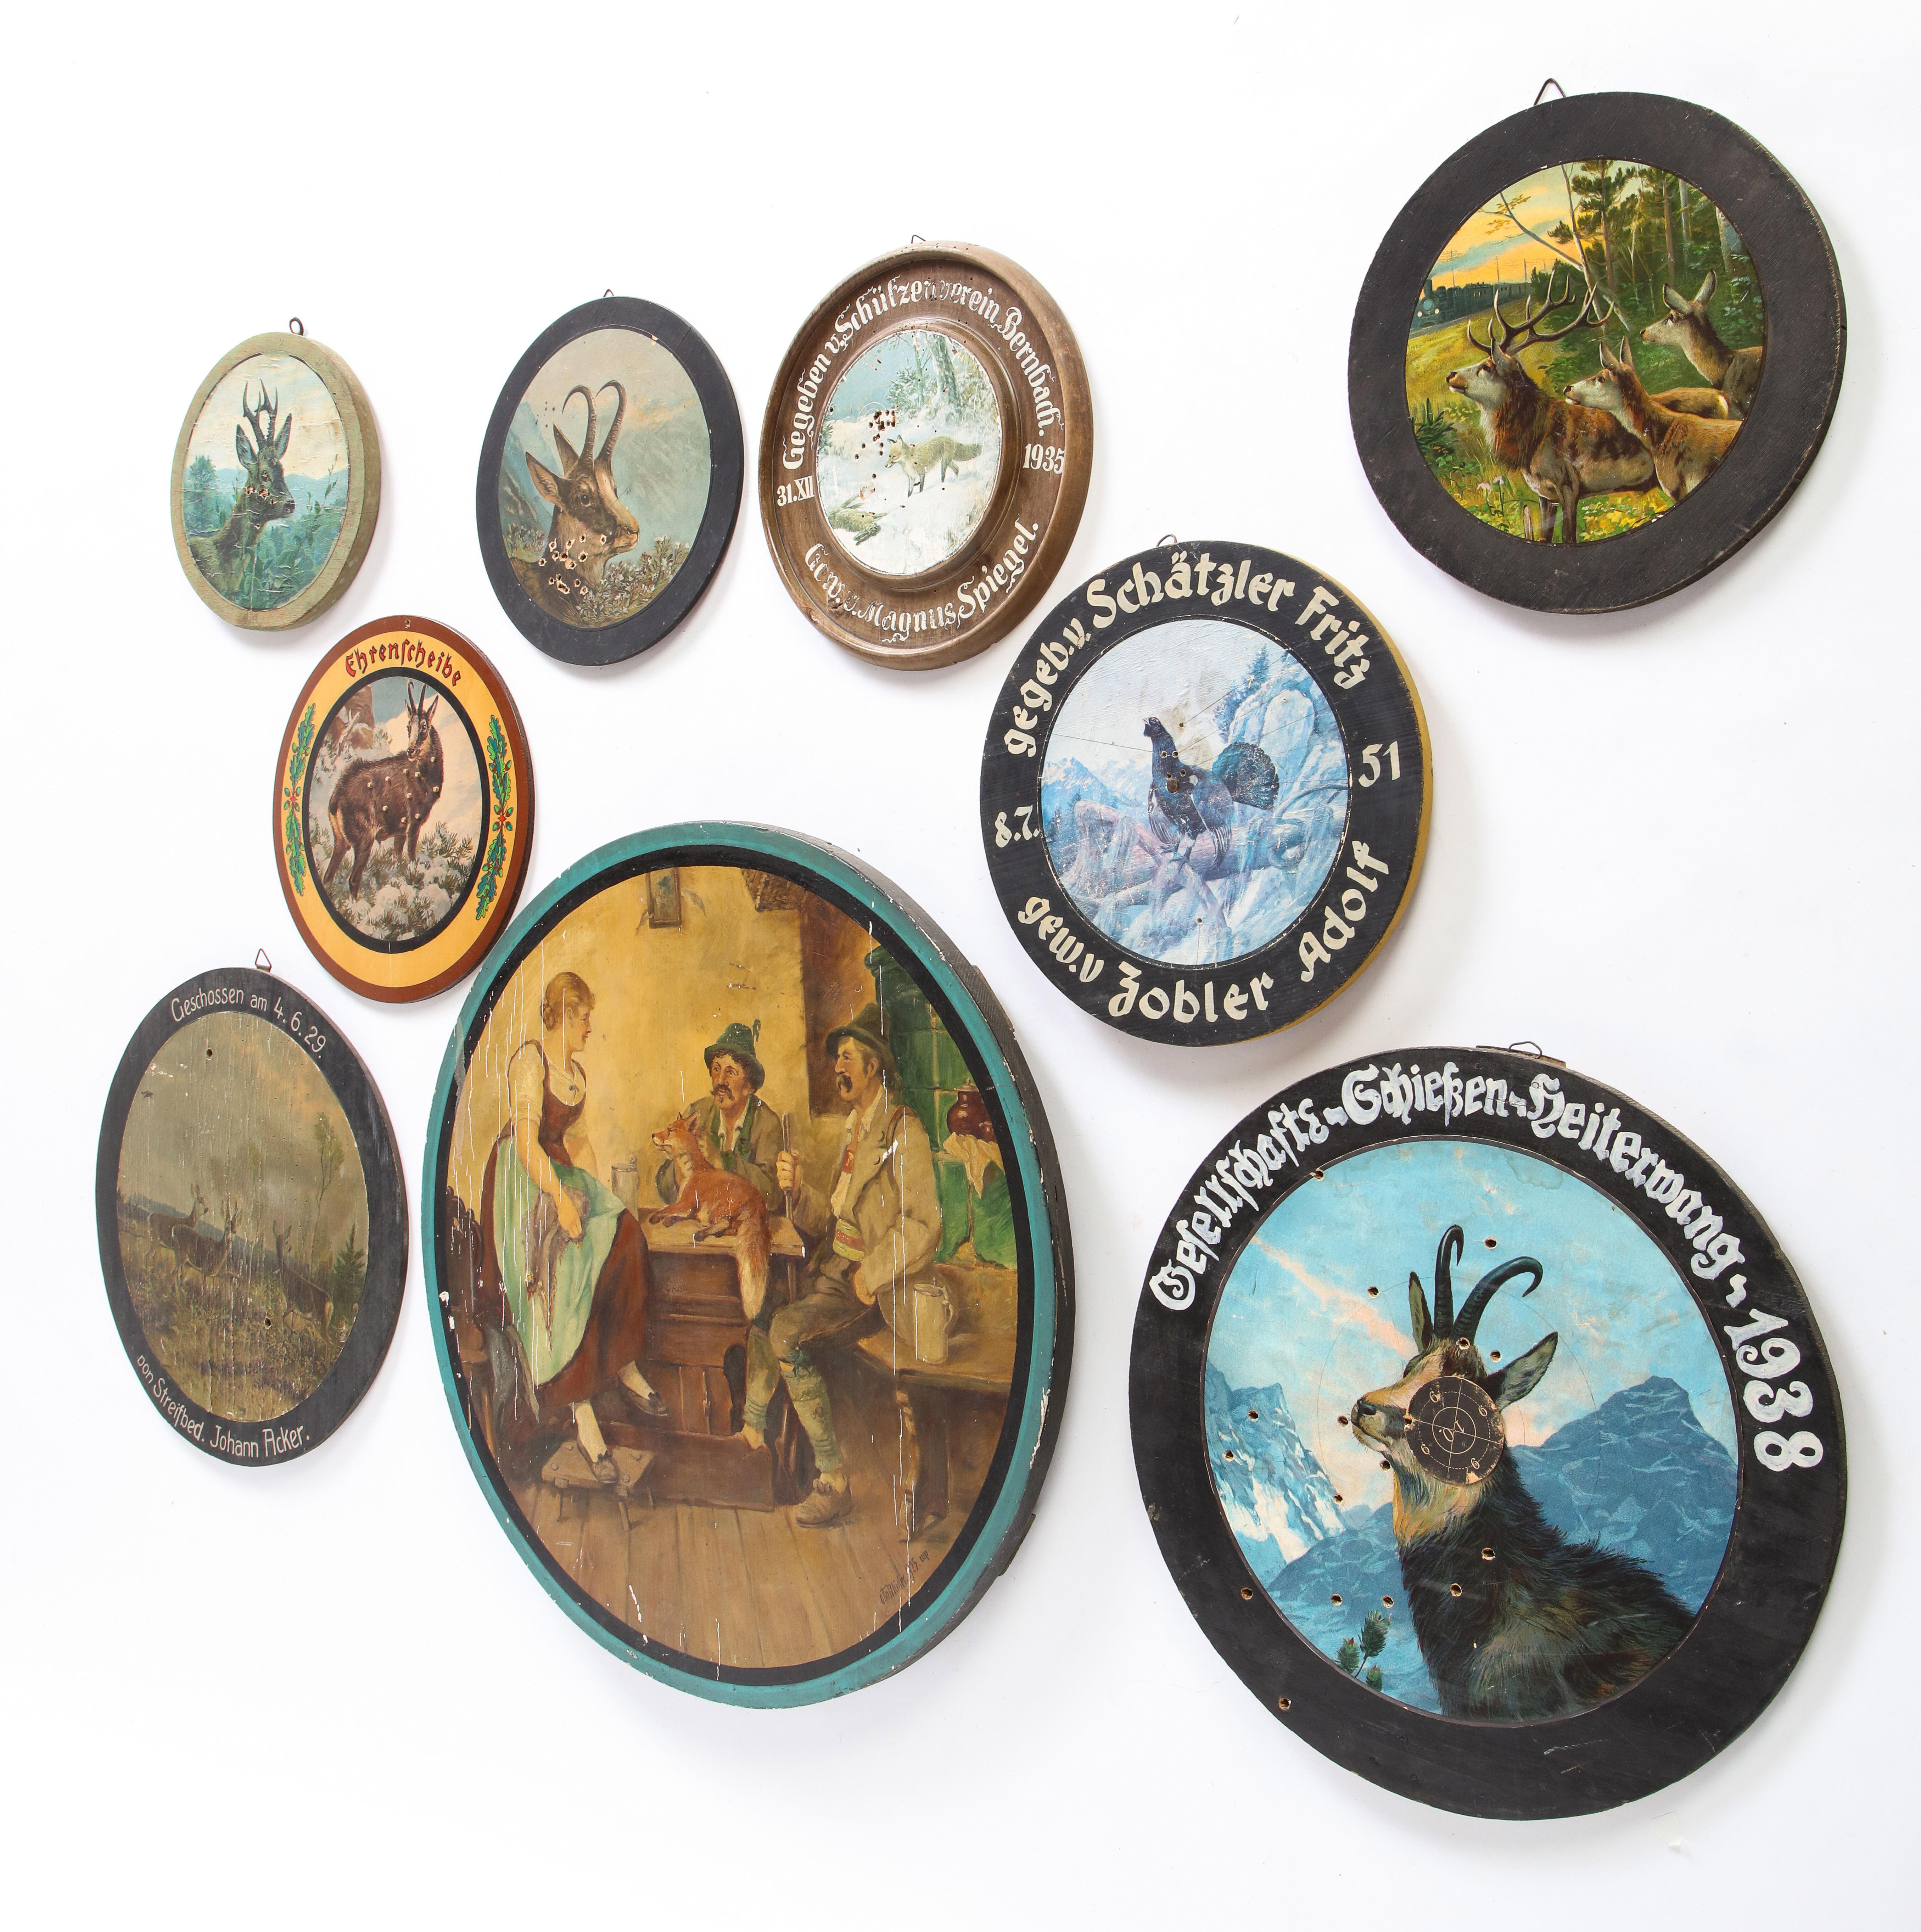 A group of nine trade signs, dart boards, marketing signs and game boards, probably Austrian, from the 20th century. All take circular form, but are of varying sizes. Each is characterized by text, wildlife scenes, and other imagery.

Property from